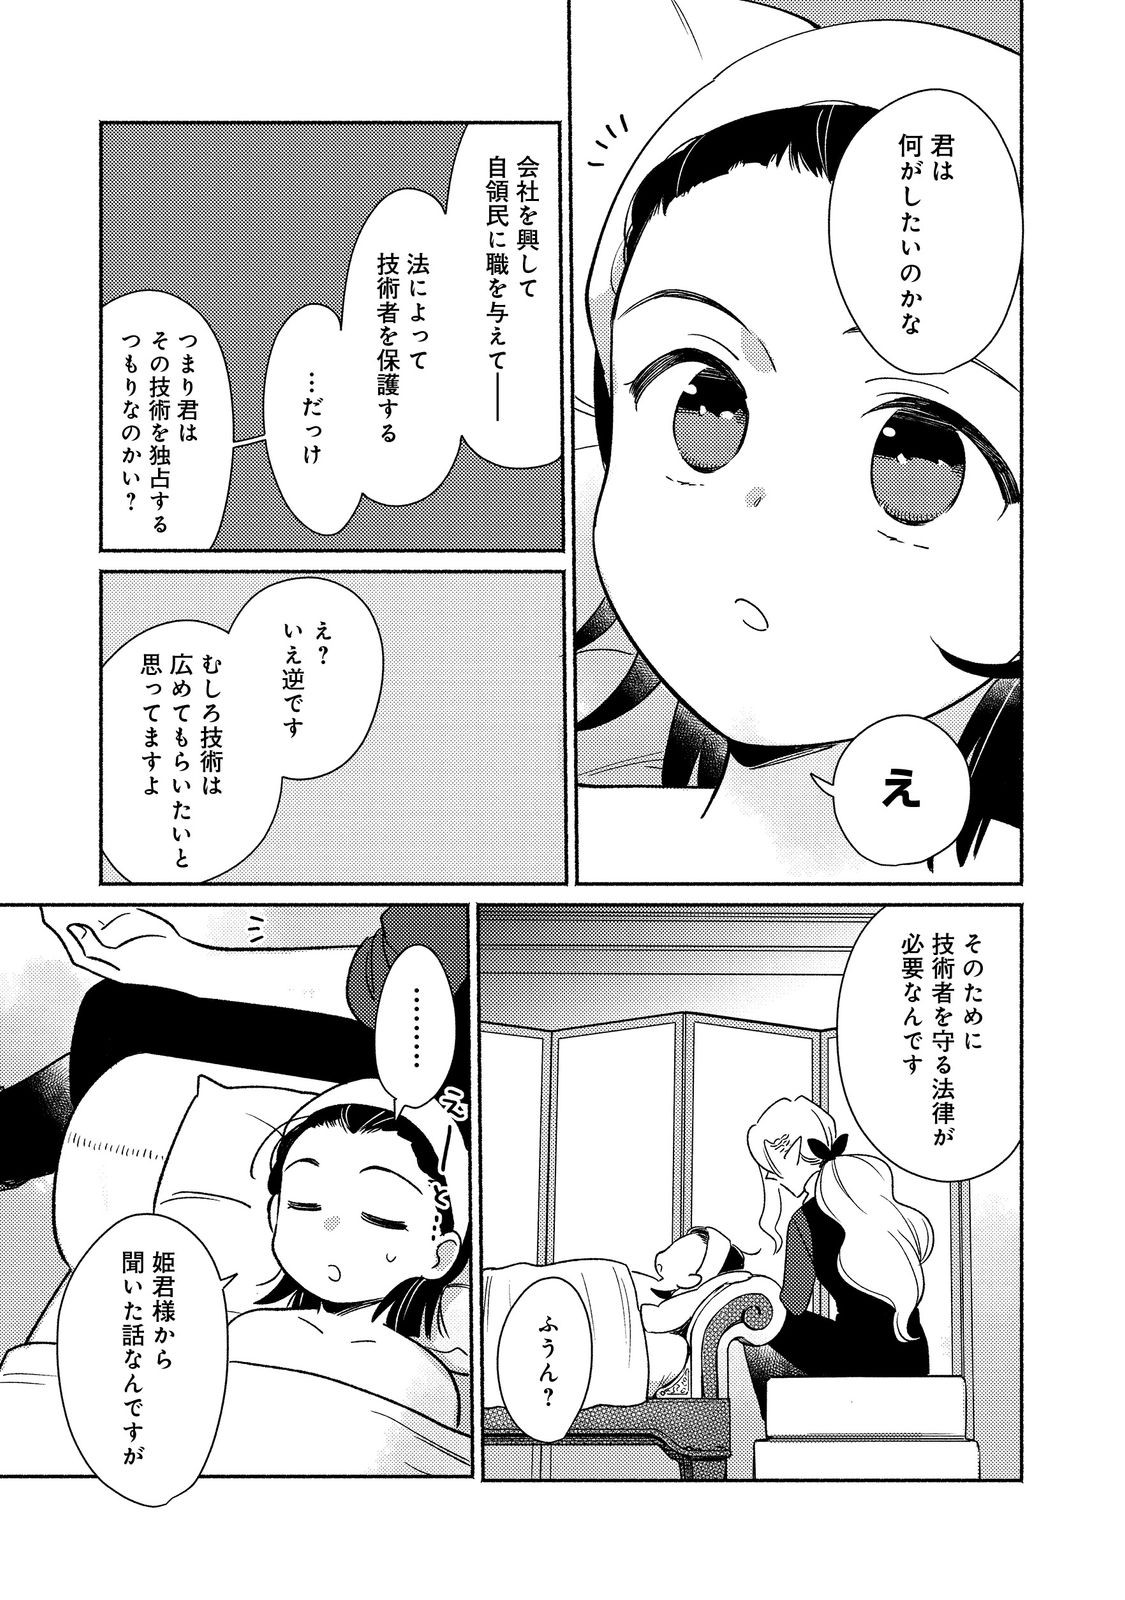 I’m the White Pig Nobleman 第20.1話 - Page 7